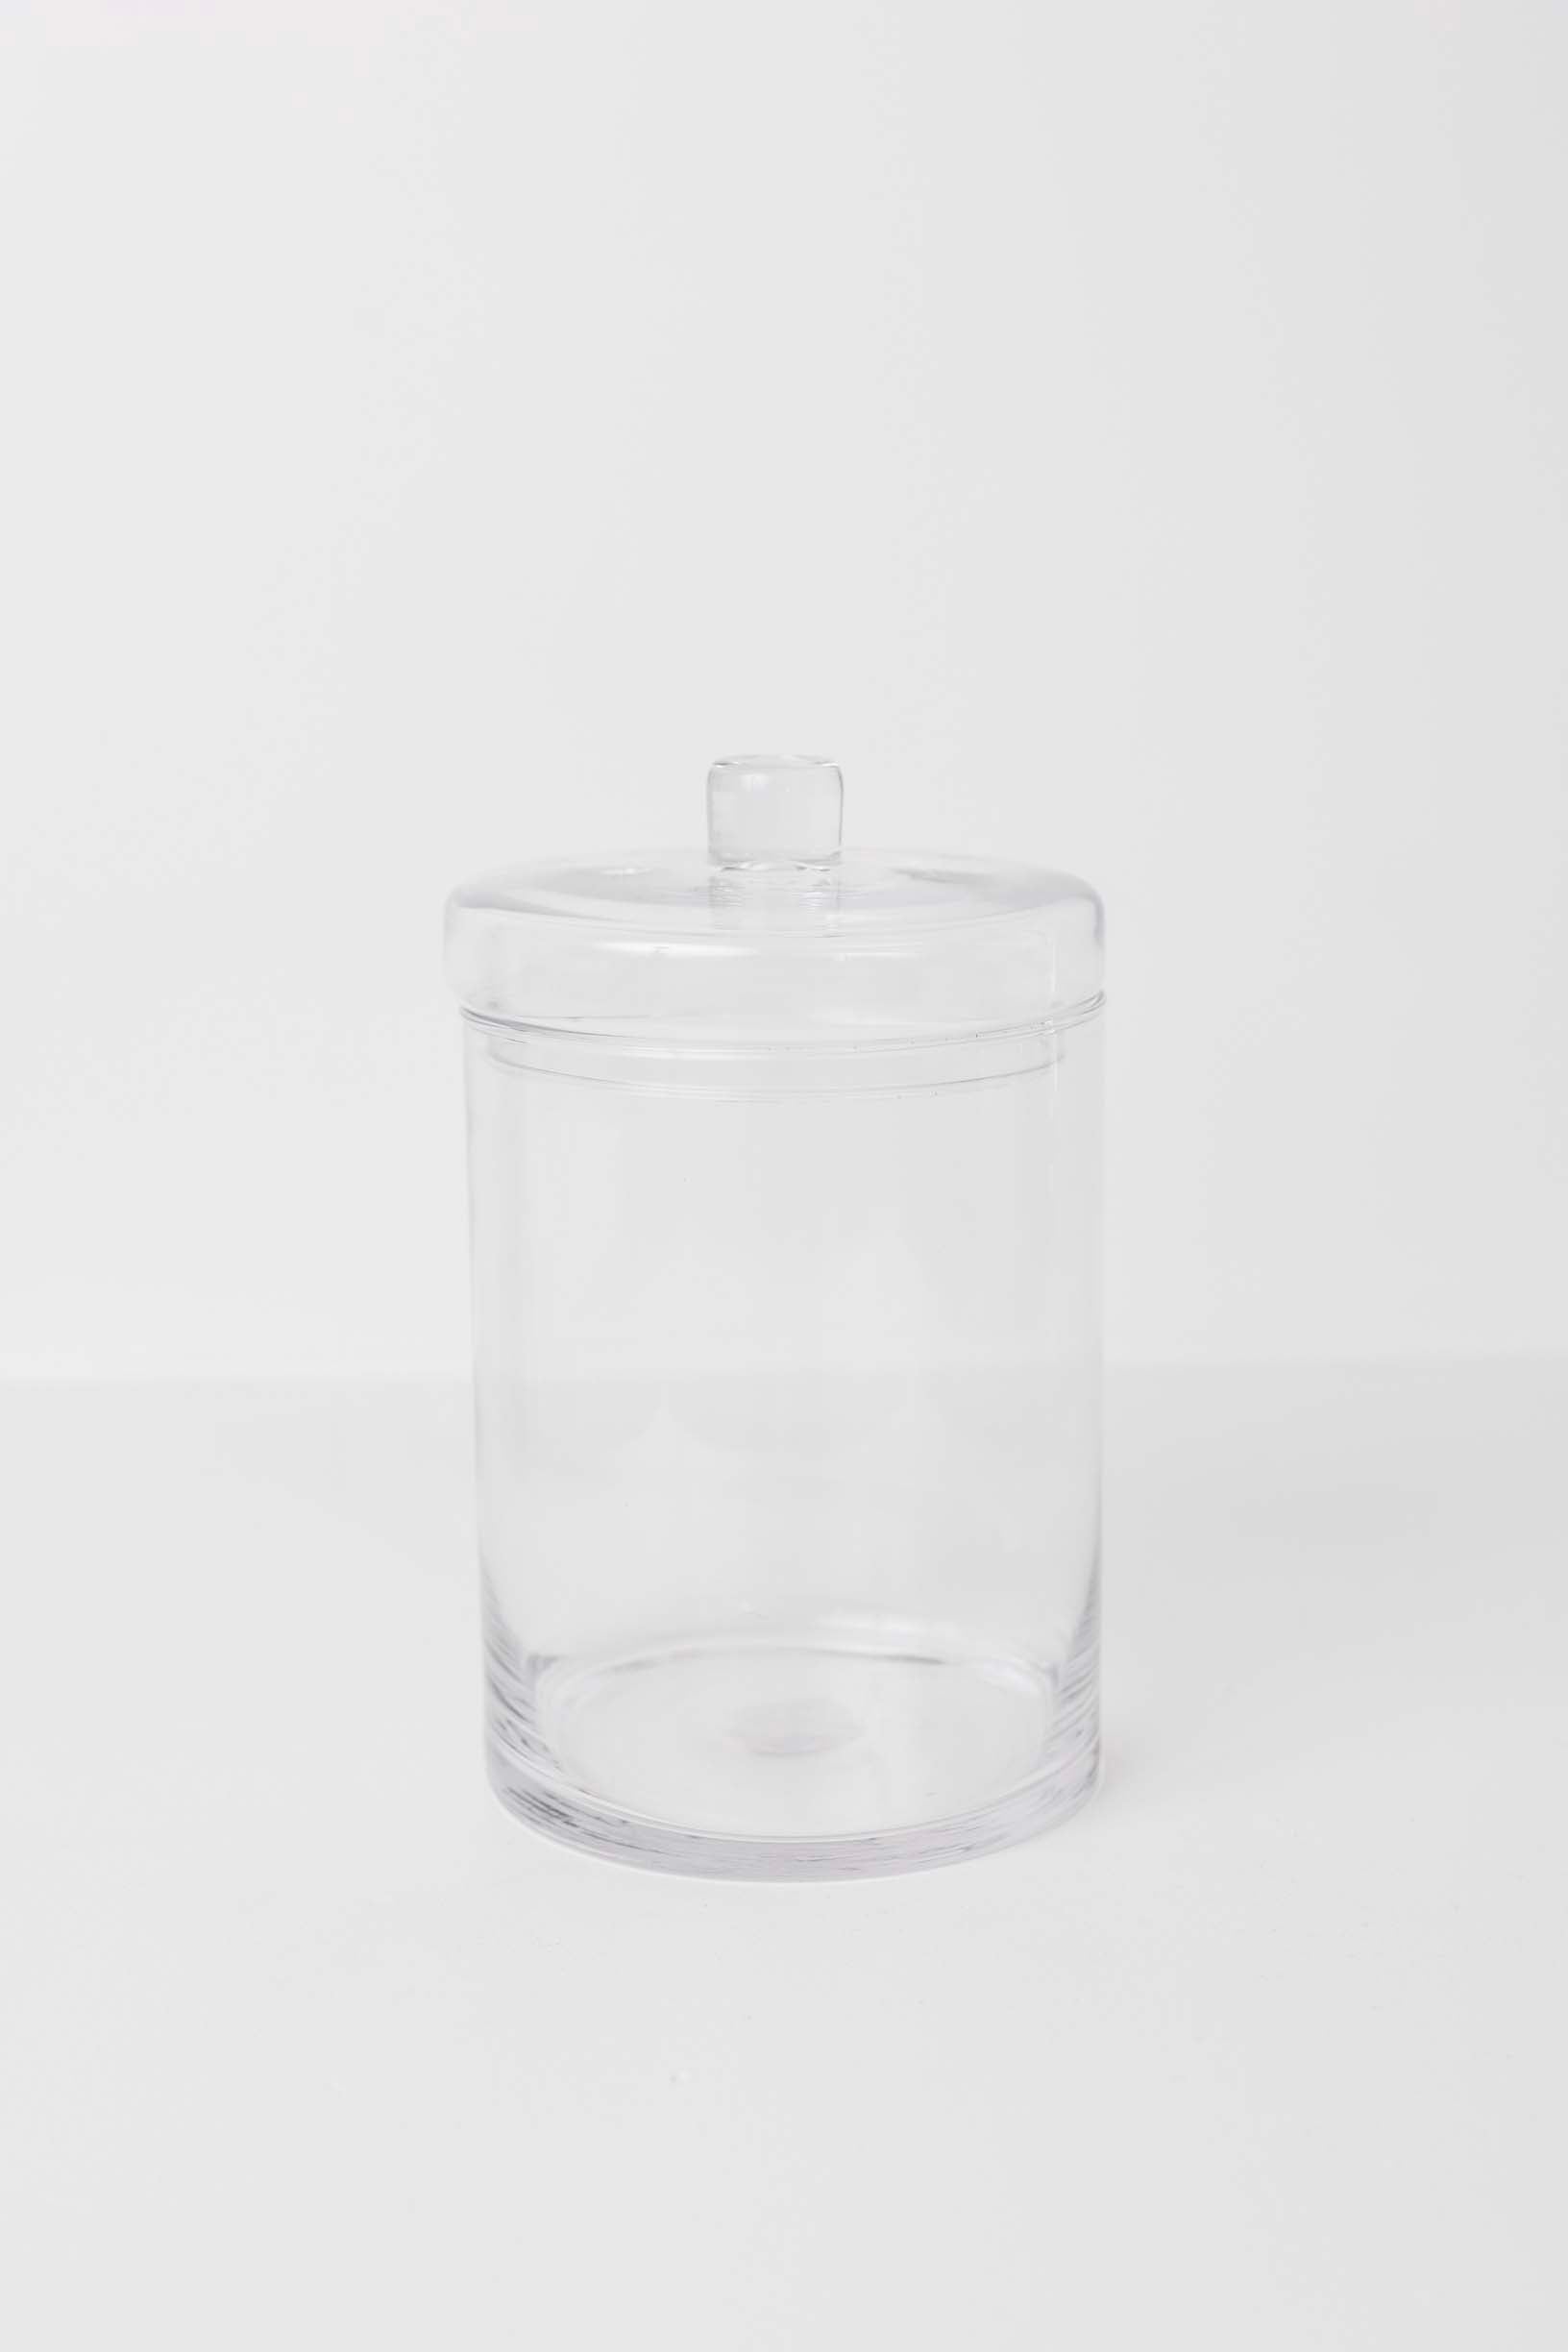 Massey Glass Canister - 3 Sizes